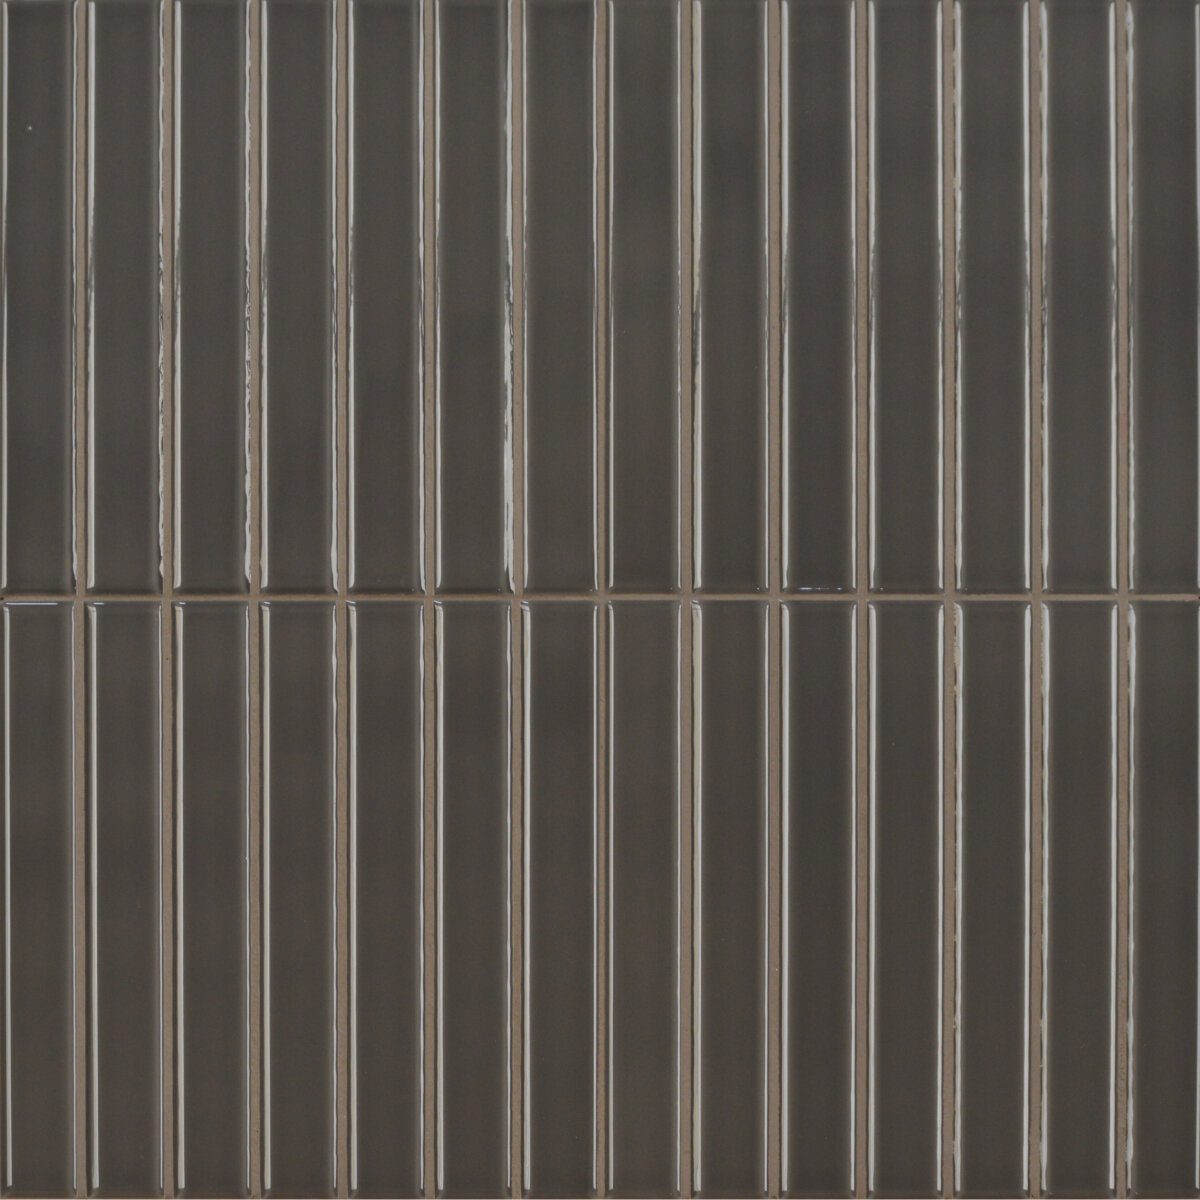 145-ptoo856 Kit Kat Marengo Gloss 25x200mm_Stiles_Product_Image_grey grout